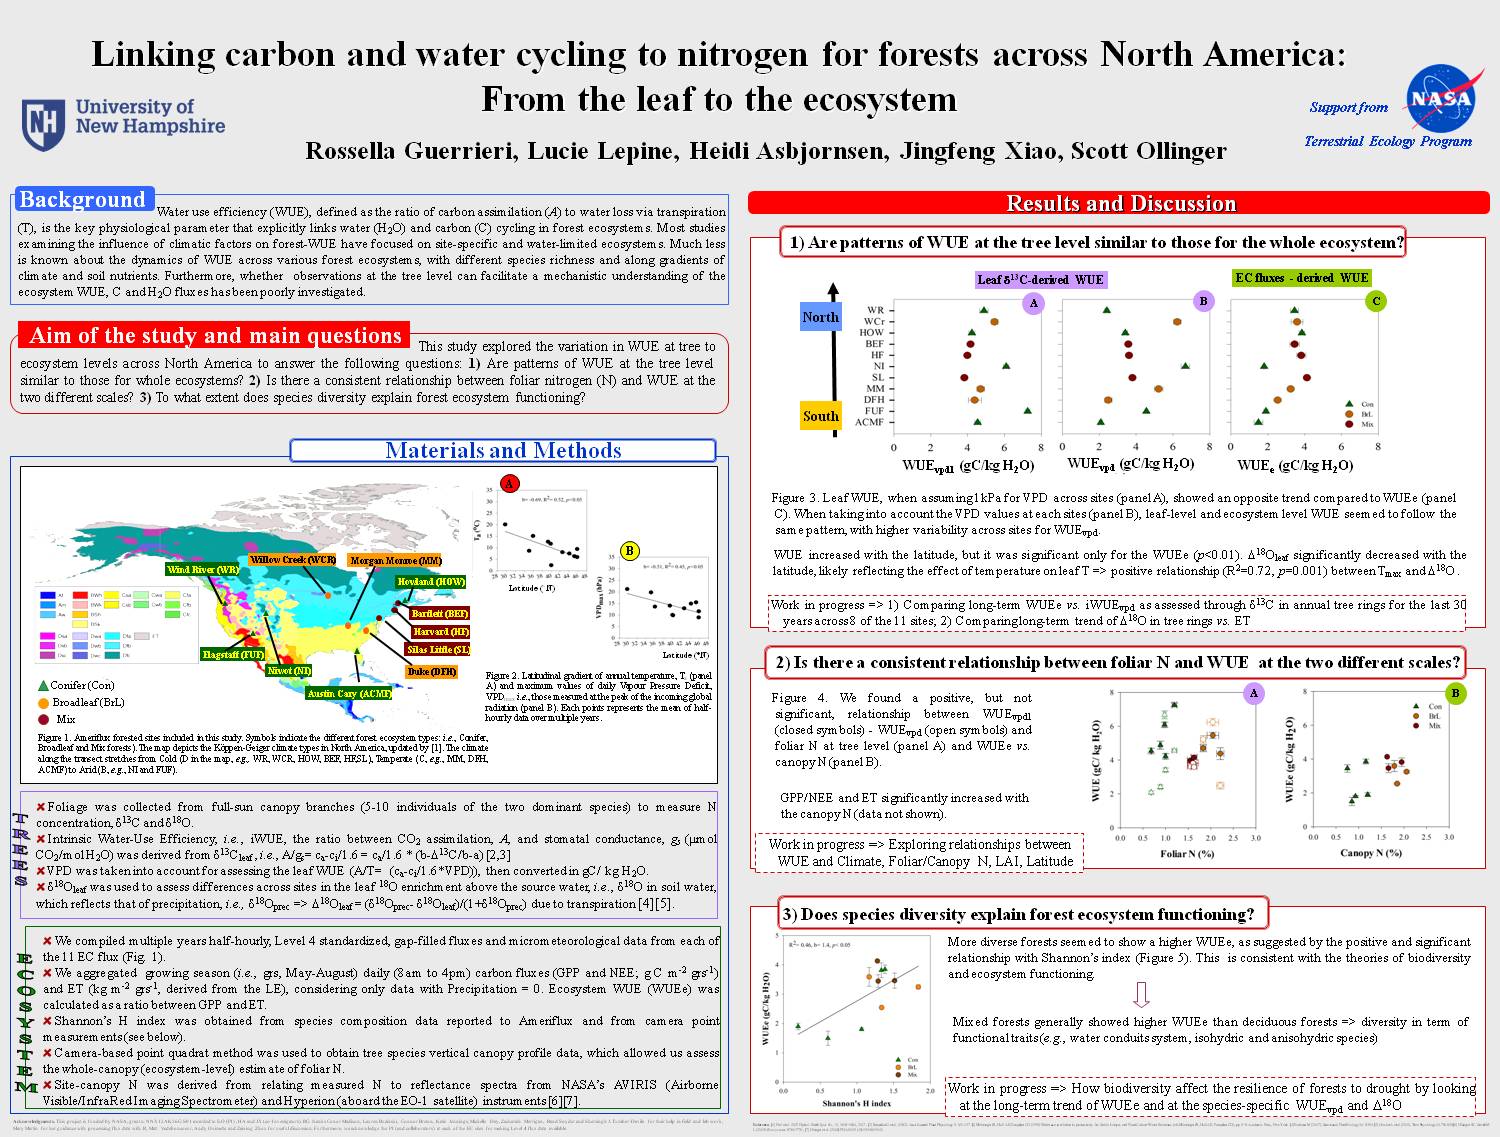 Linking Carbon And Water Cycling To Nitrogen For Forests Across North America: From The Leaf To The Ecosystem by rogue77